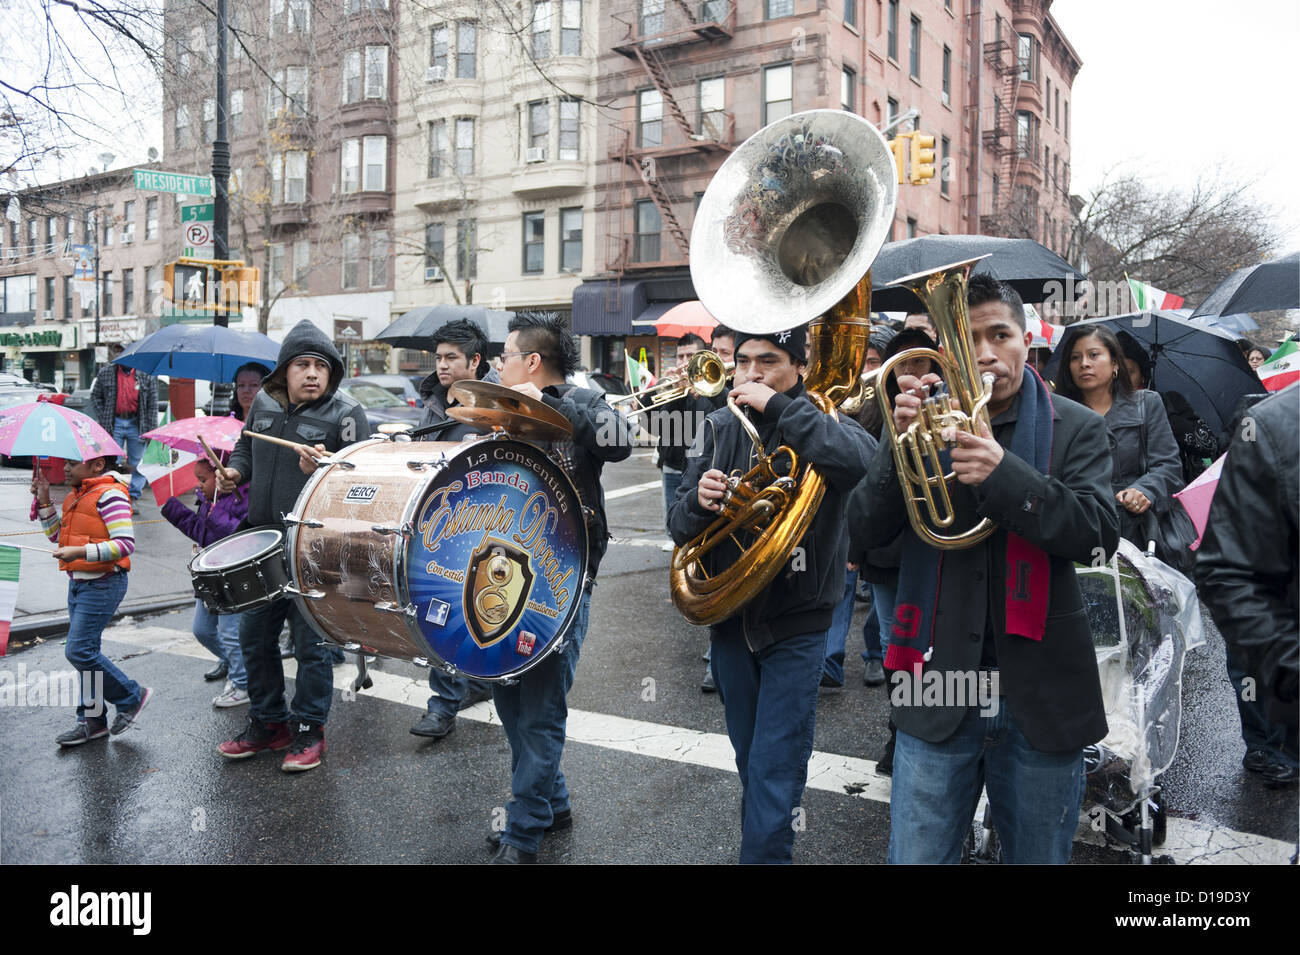 Festival of the Virgin of Guadalupe, the patron Saint of Mexico, in Park Slope, 2012. Stock Photo